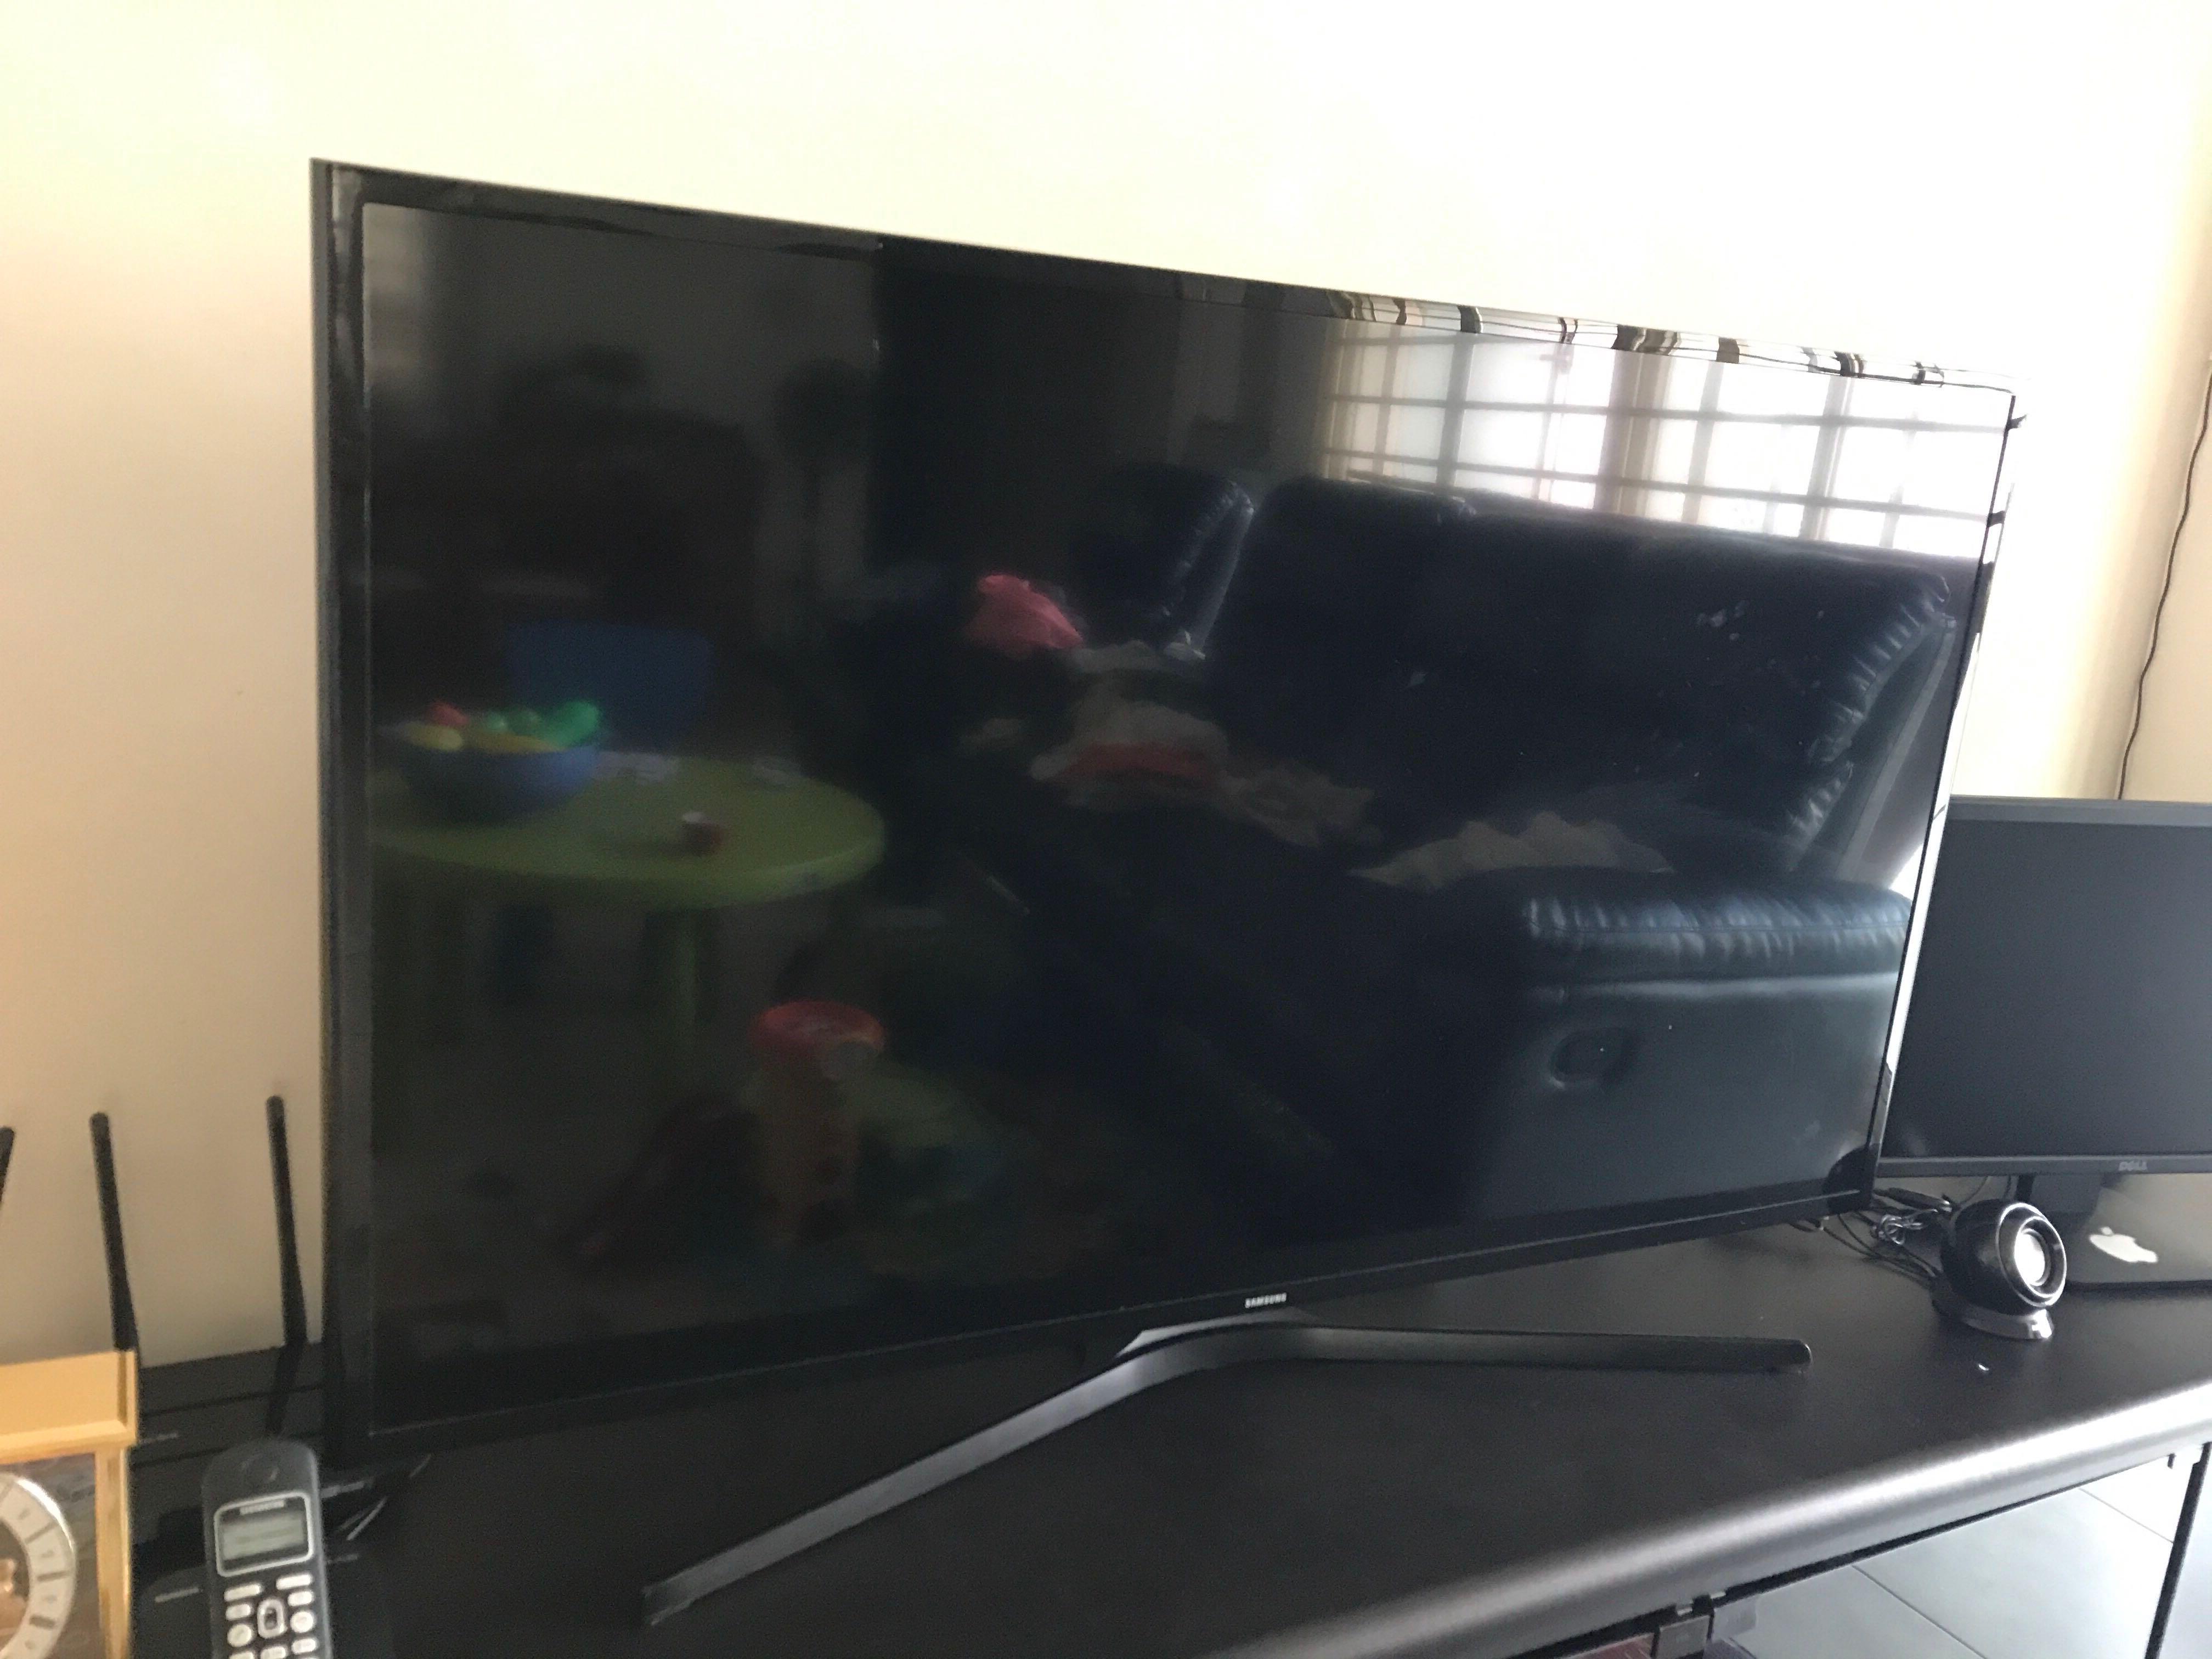 Samsung Led Tv 49 Inch Screen Problem With Remote Control In Working Condition Tv Home Appliances Tv Entertainment Tv Parts Accessories On Carousell